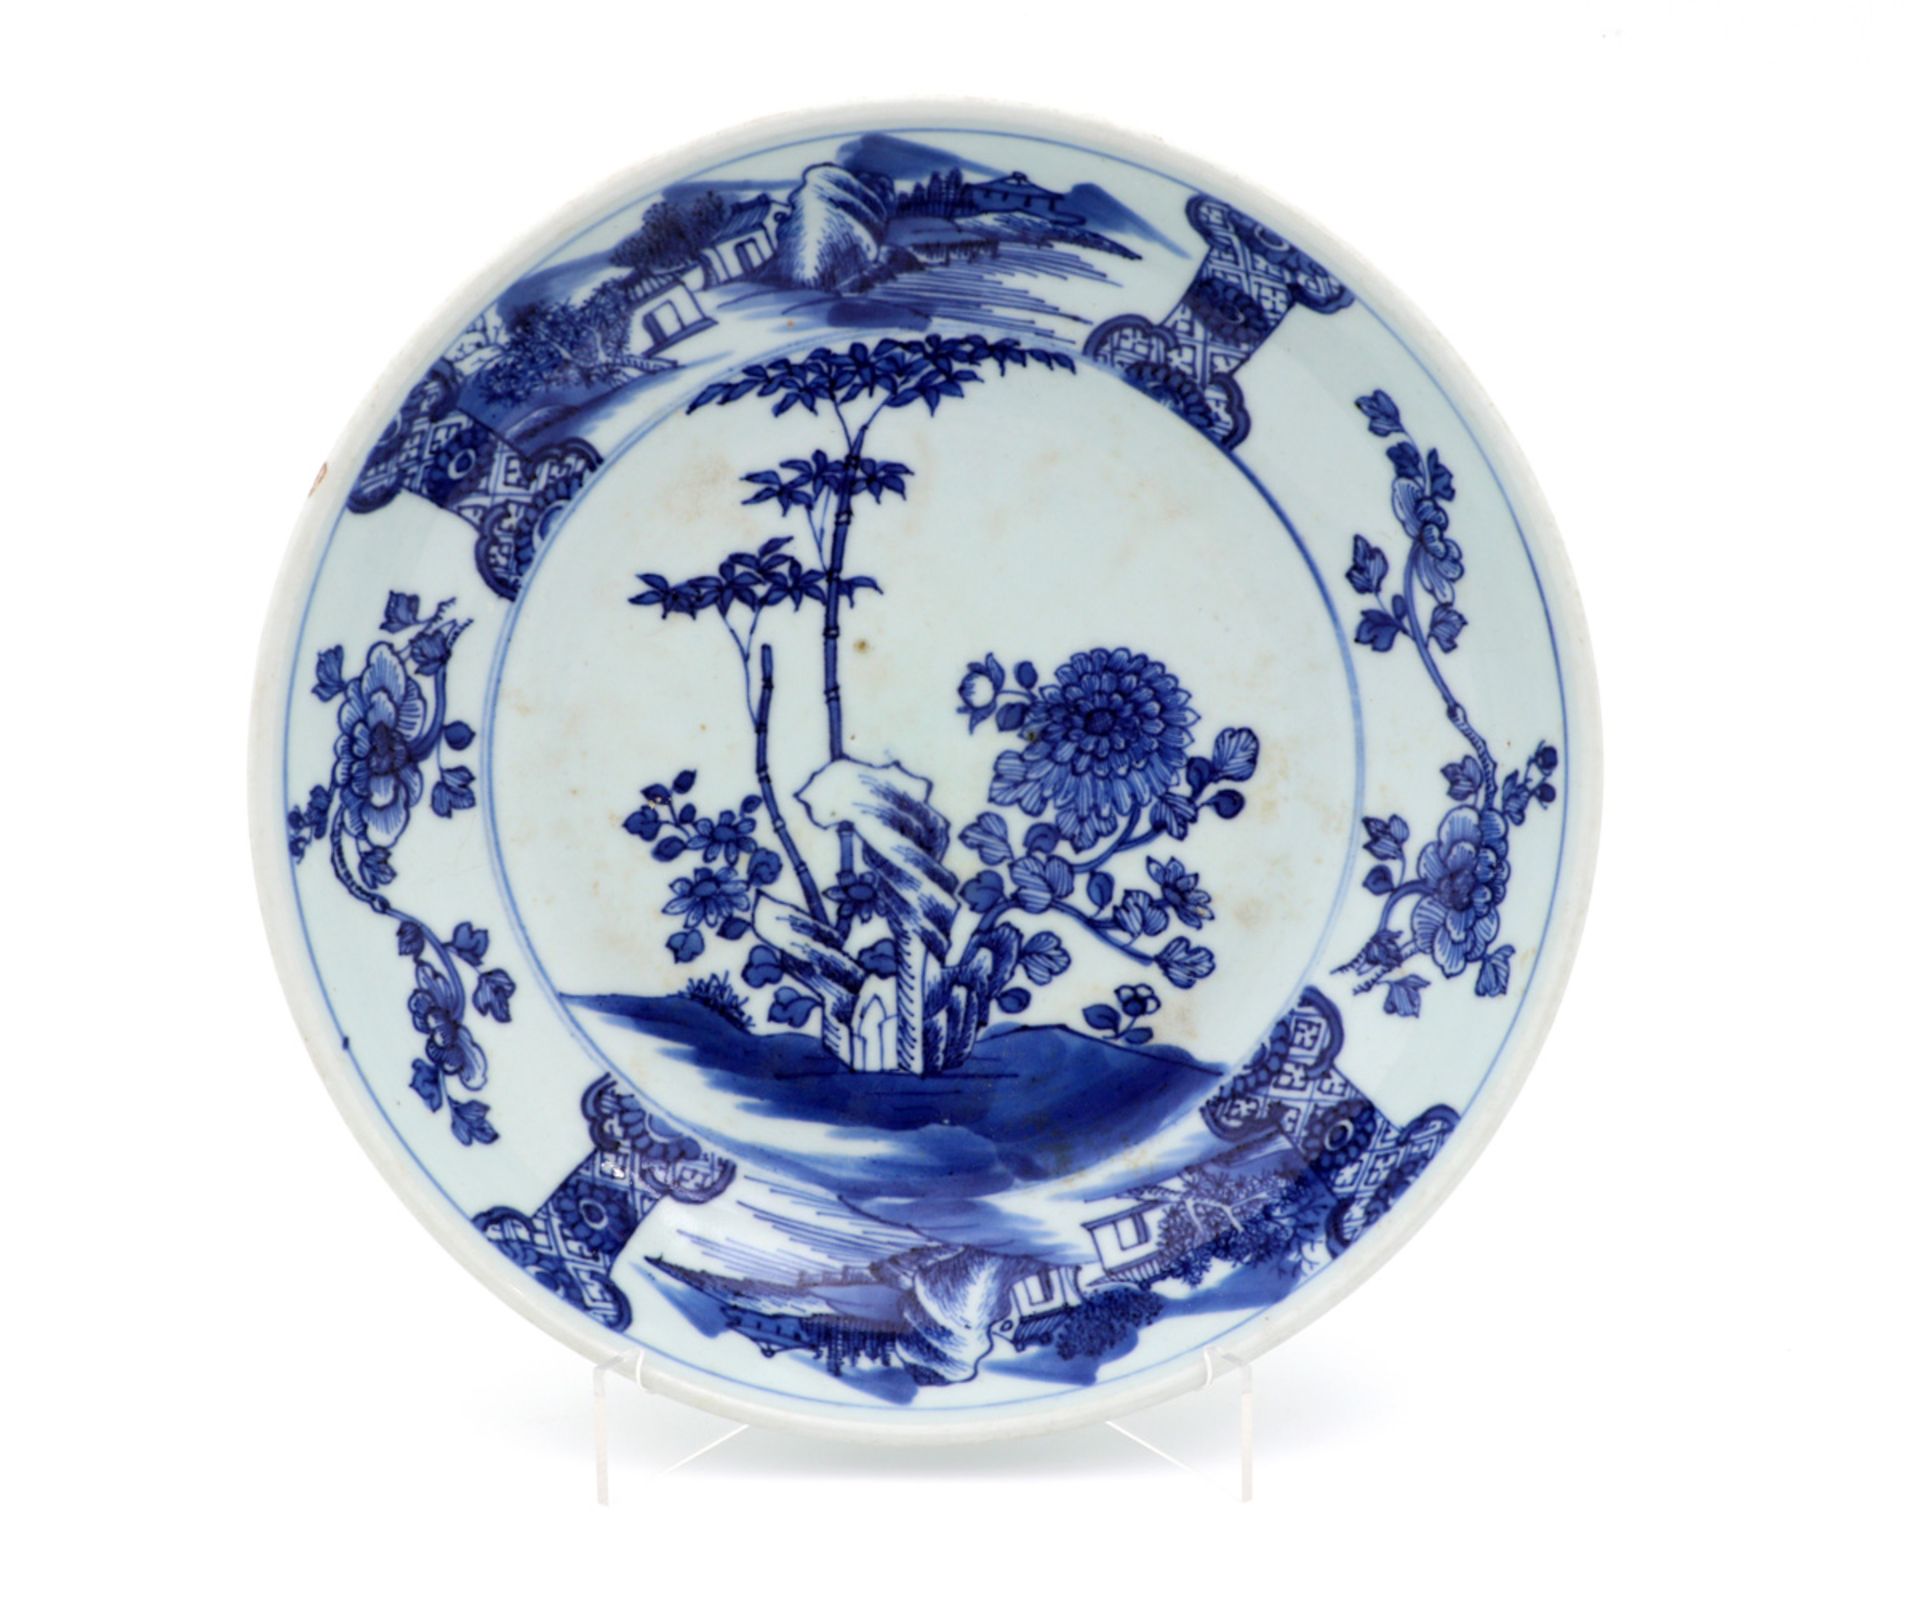 A CHINESE PORCELAIN SAUCER Chinese porcelain, 20th Century, blue and white decoration depicting